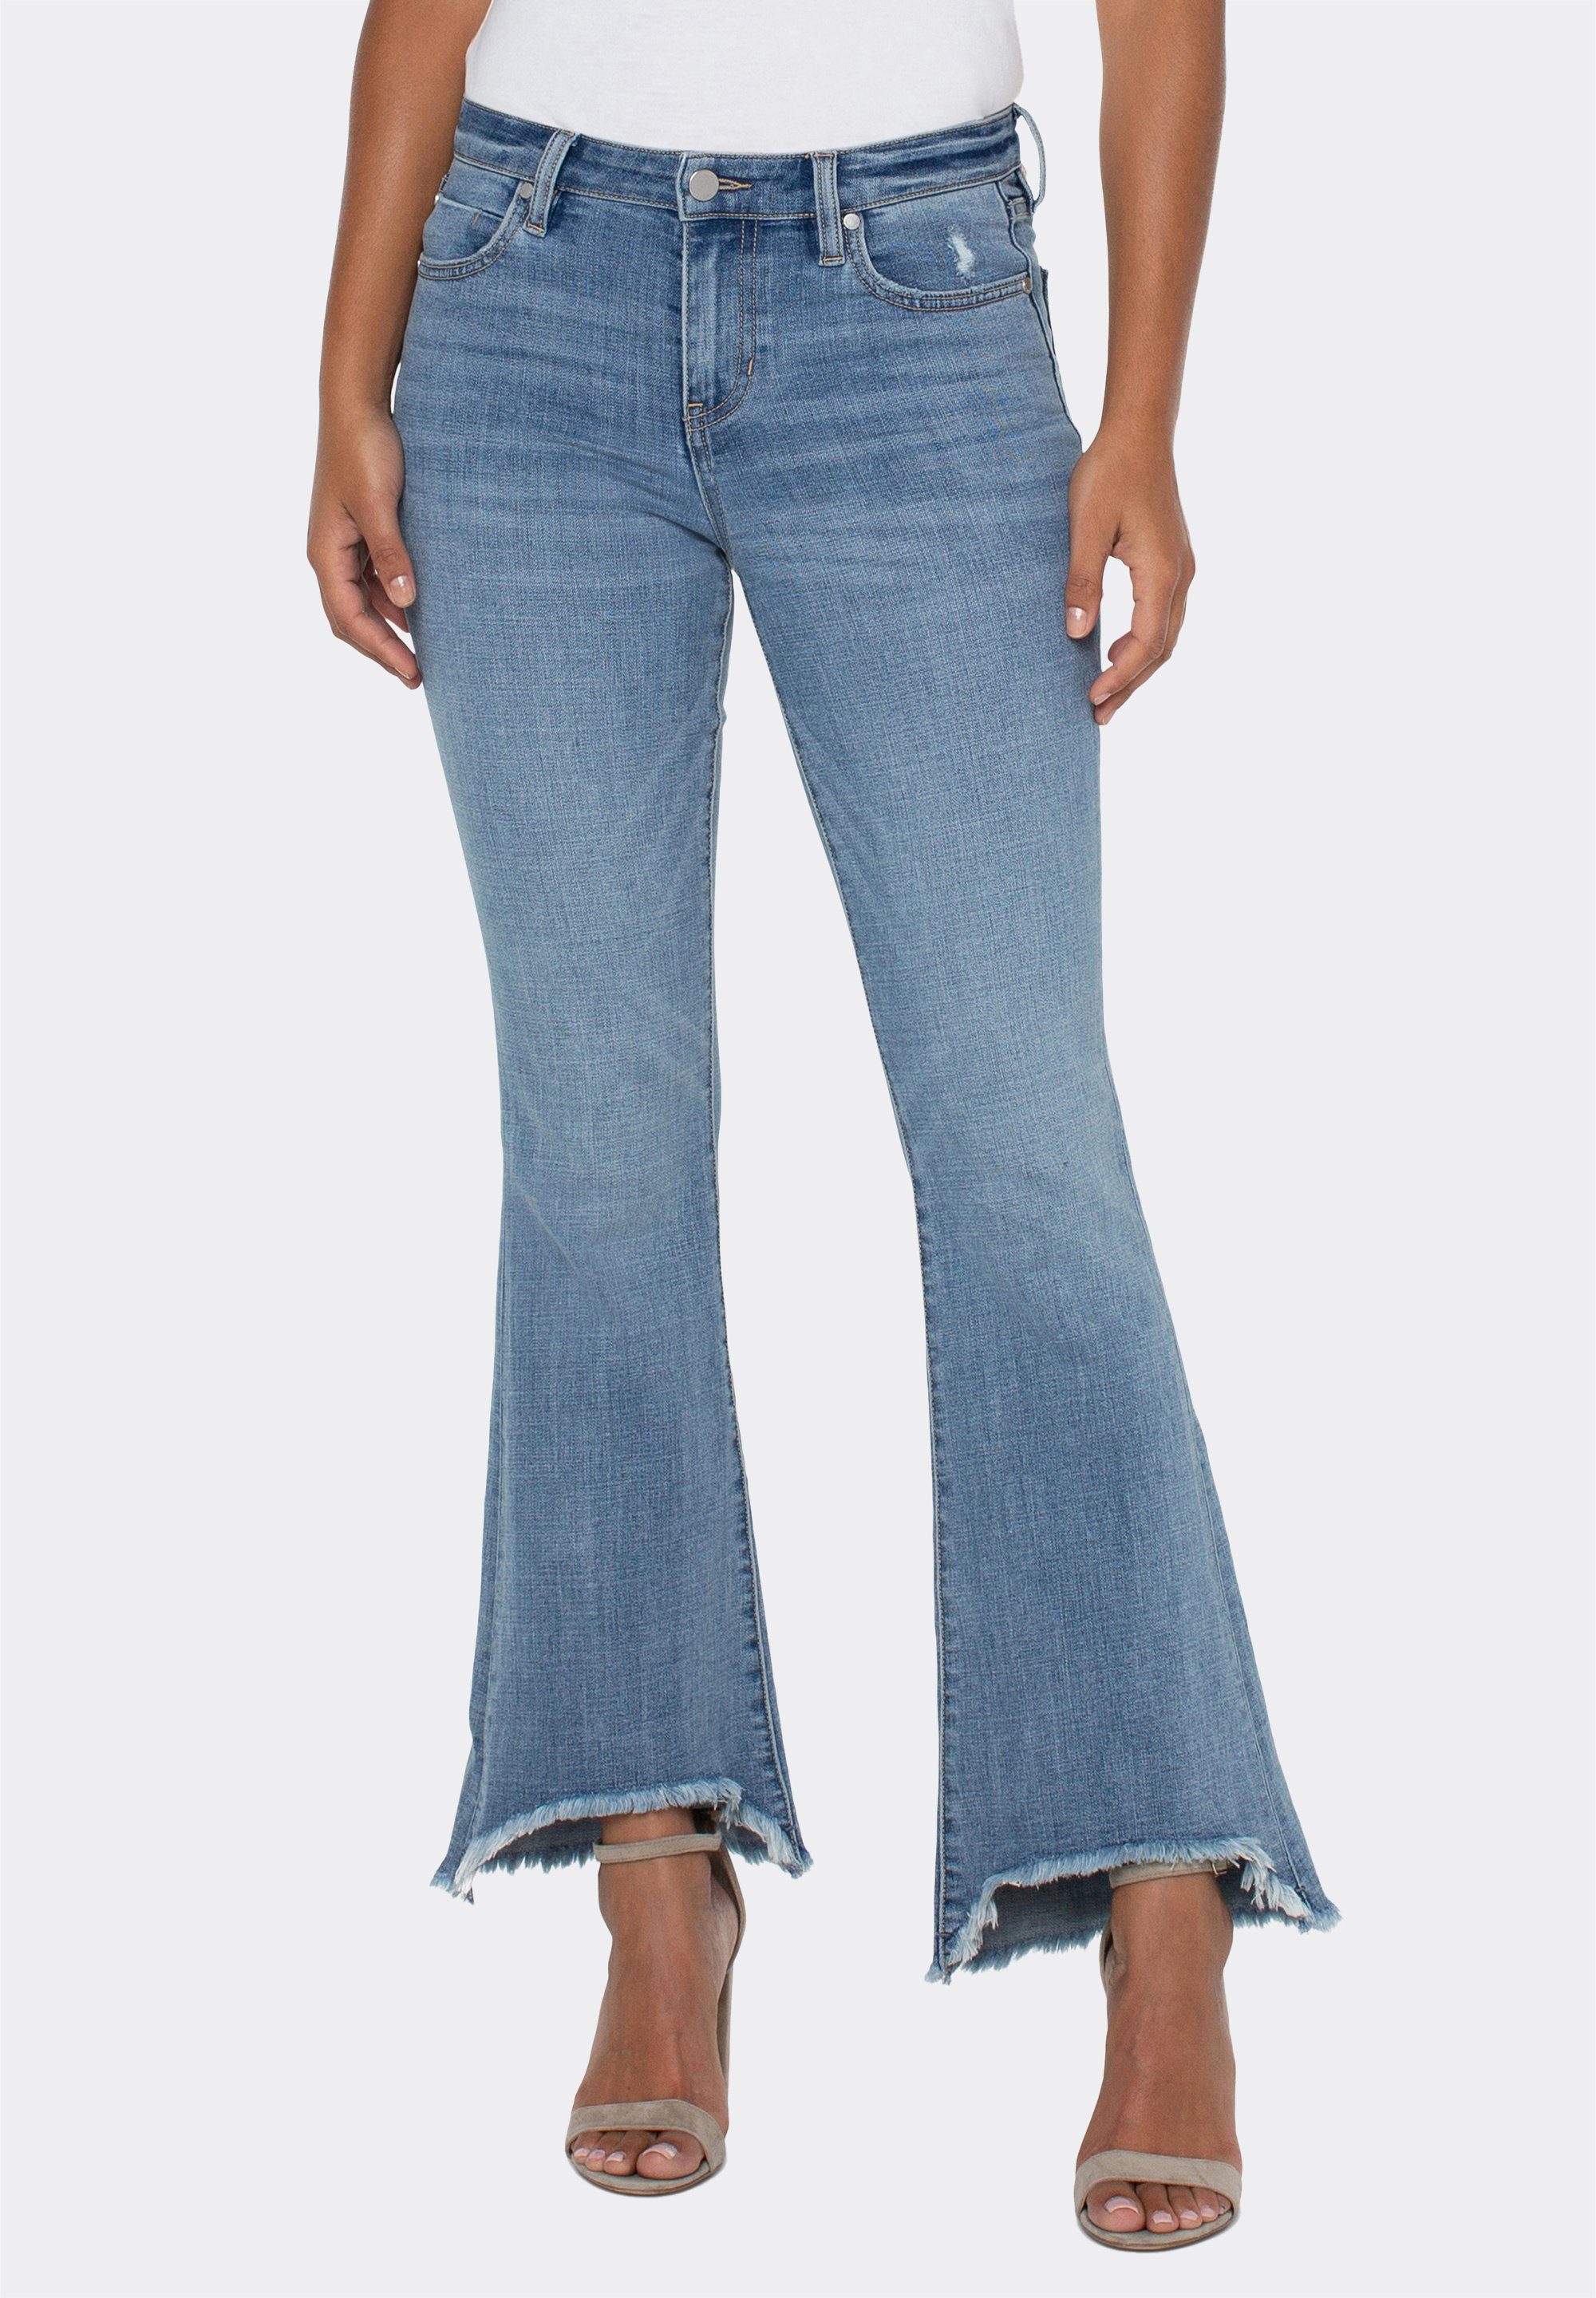 Liverpool Bootcut-Jeans Hannah Flare Stretchy und komfortabel